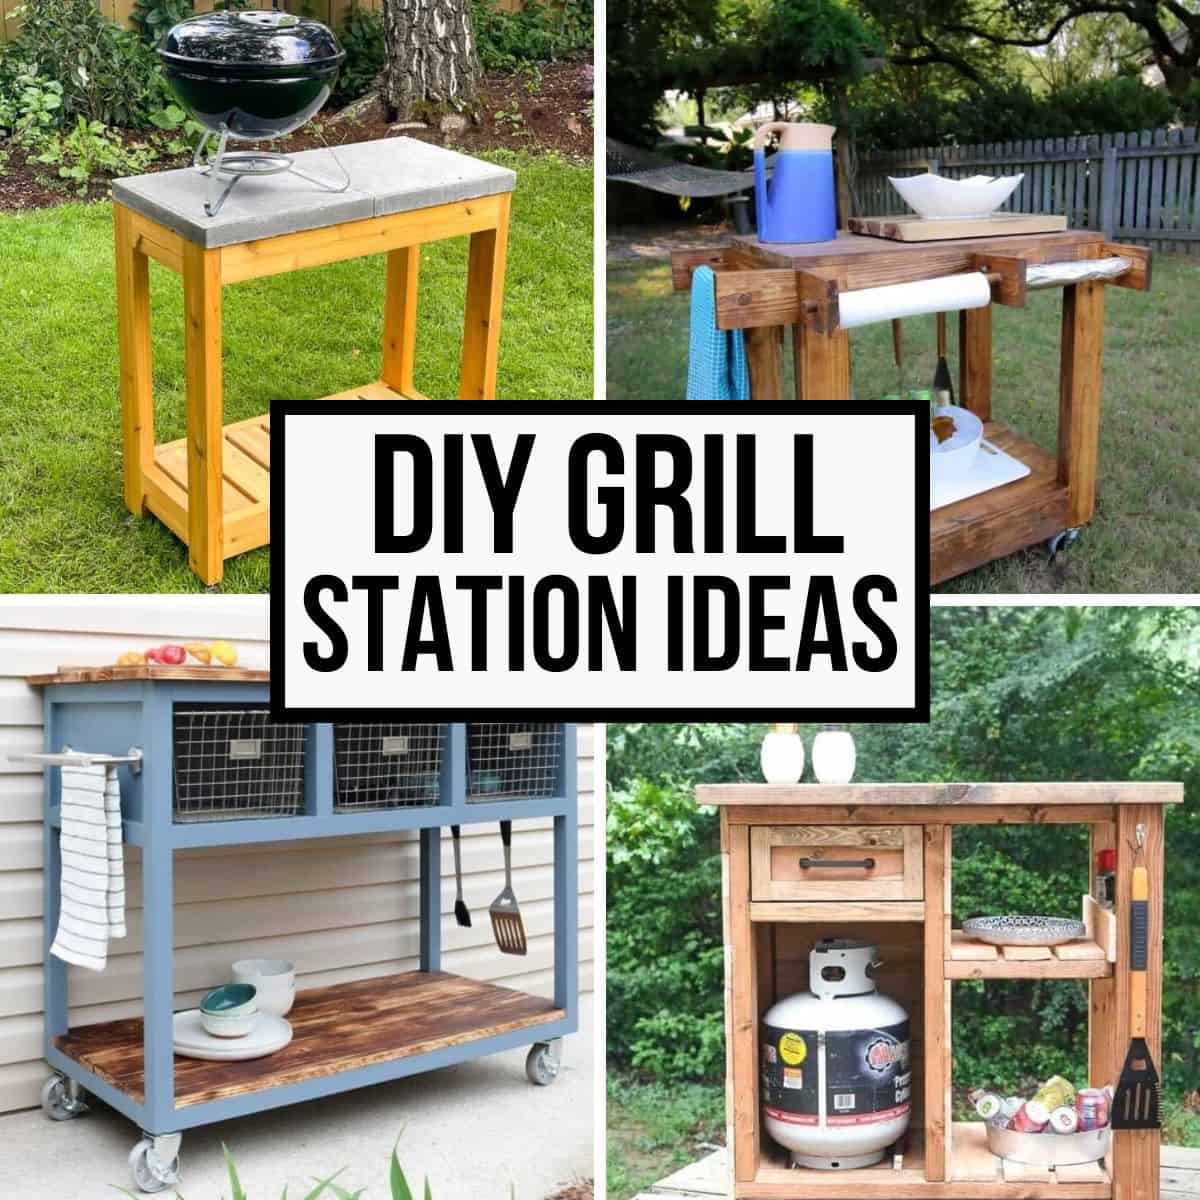 11 Easy DIY Outdoor Grill Station Ideas To Make This Weekend The ...